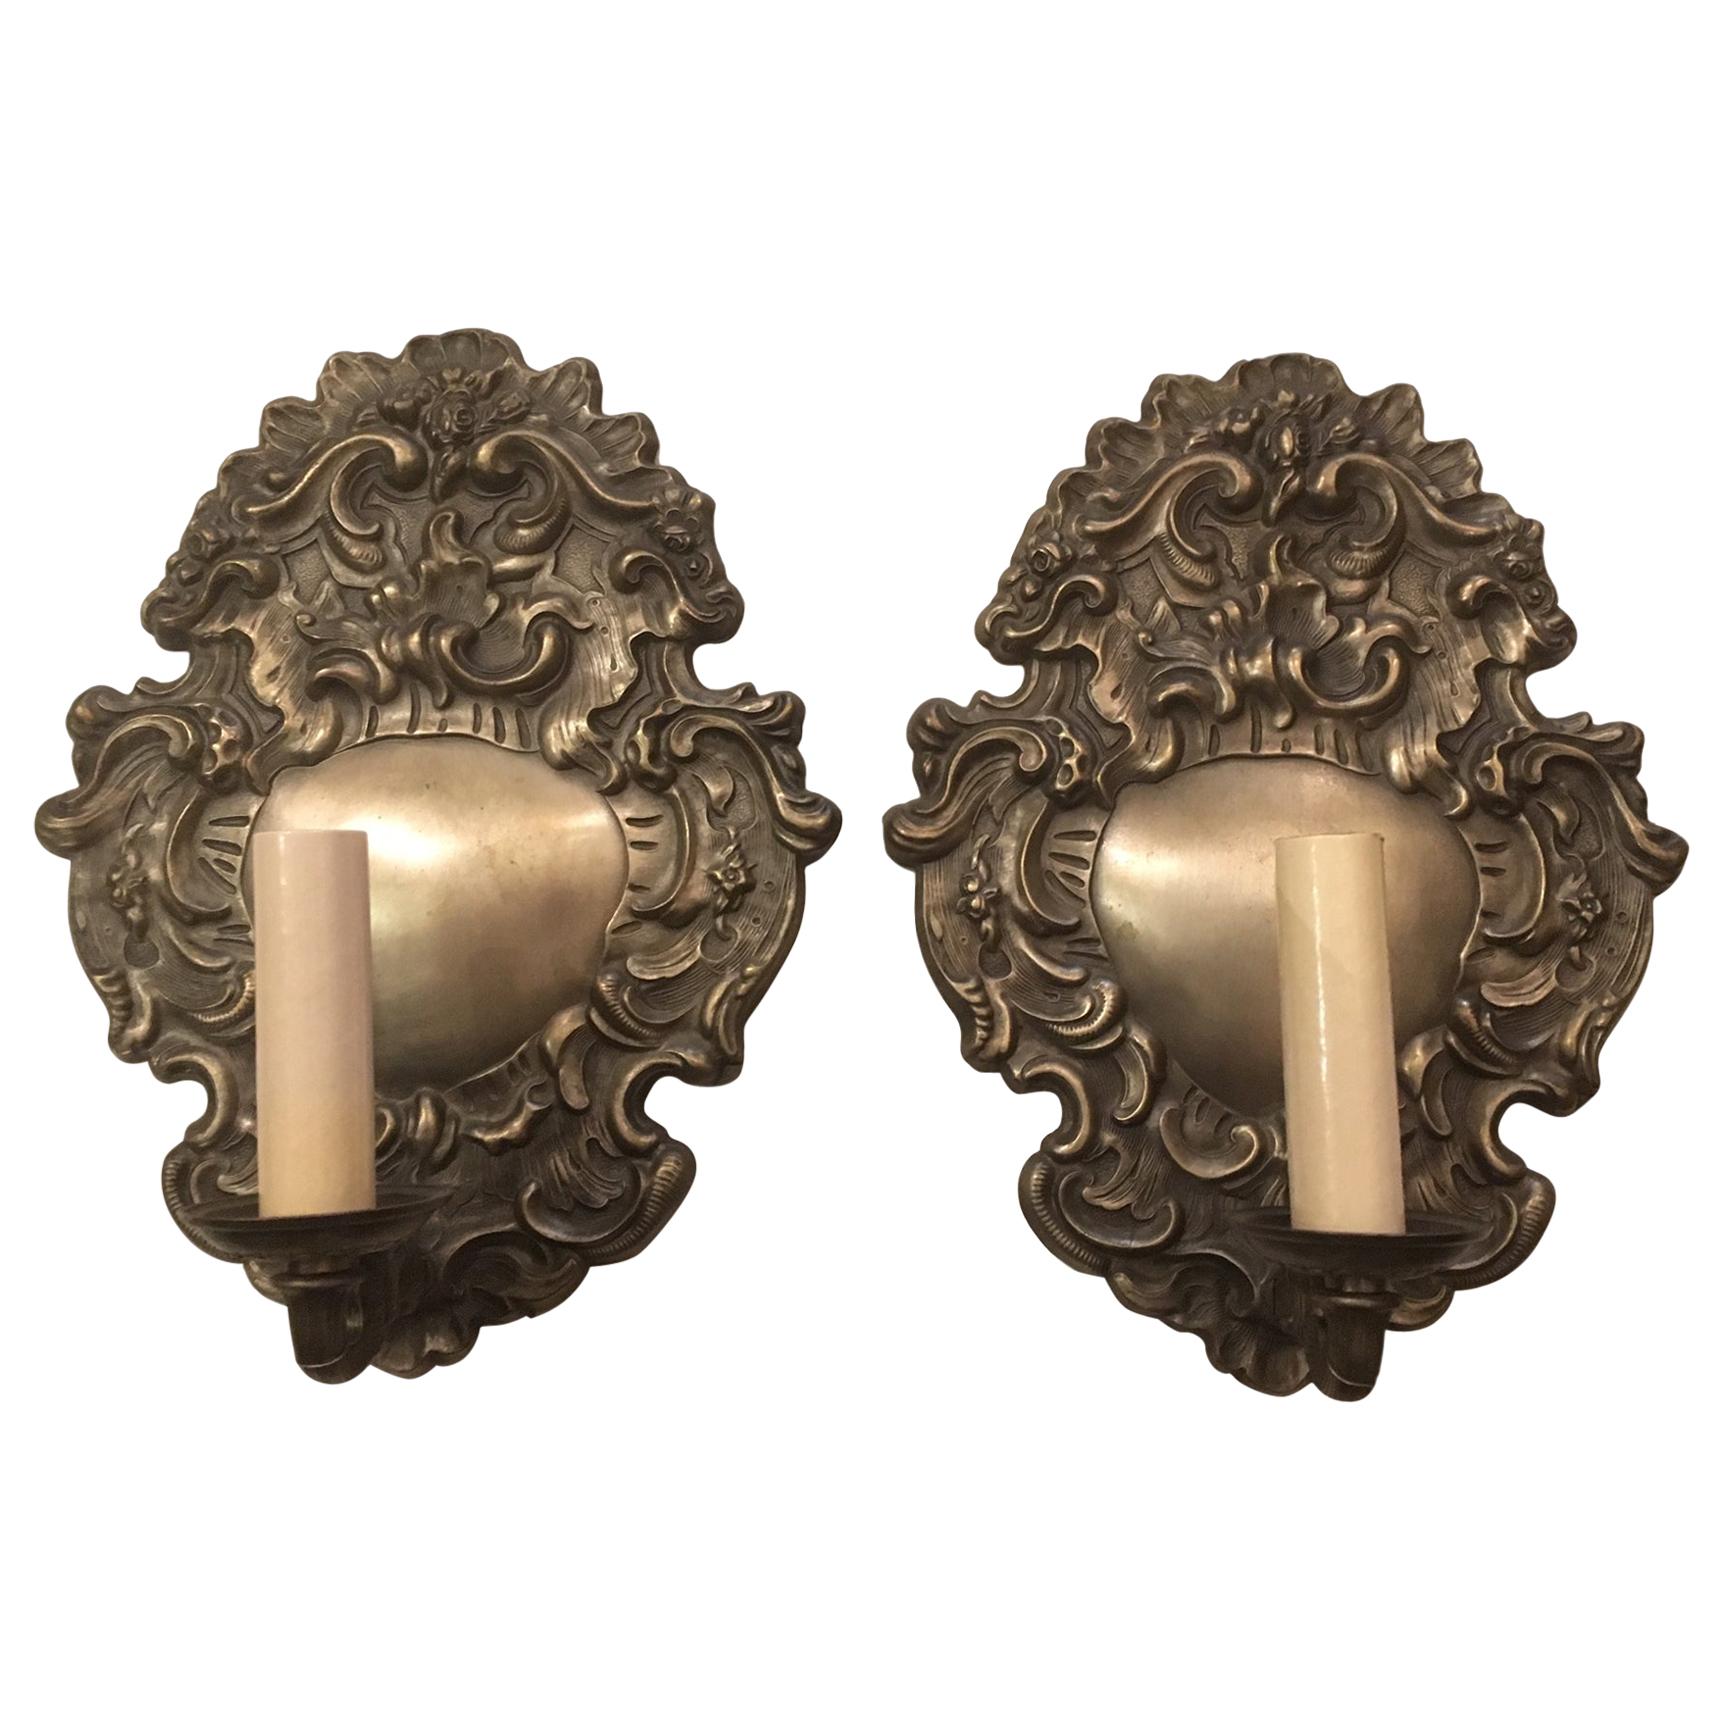 Silver Plated Single Light Sconces For Sale